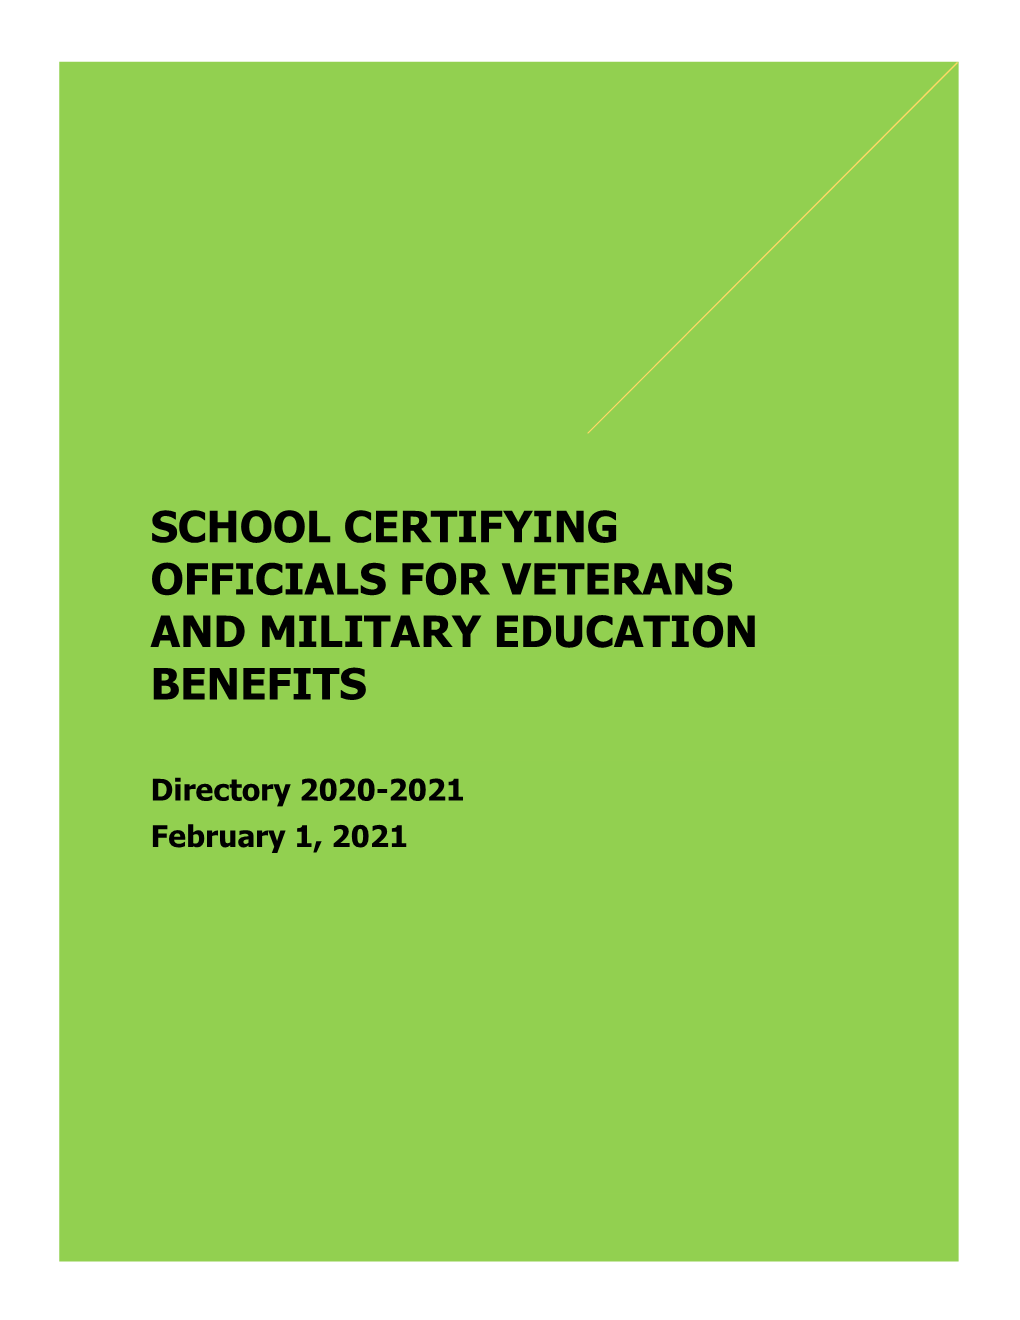 School Certifying Officials for Veterans and Military Education Benefits